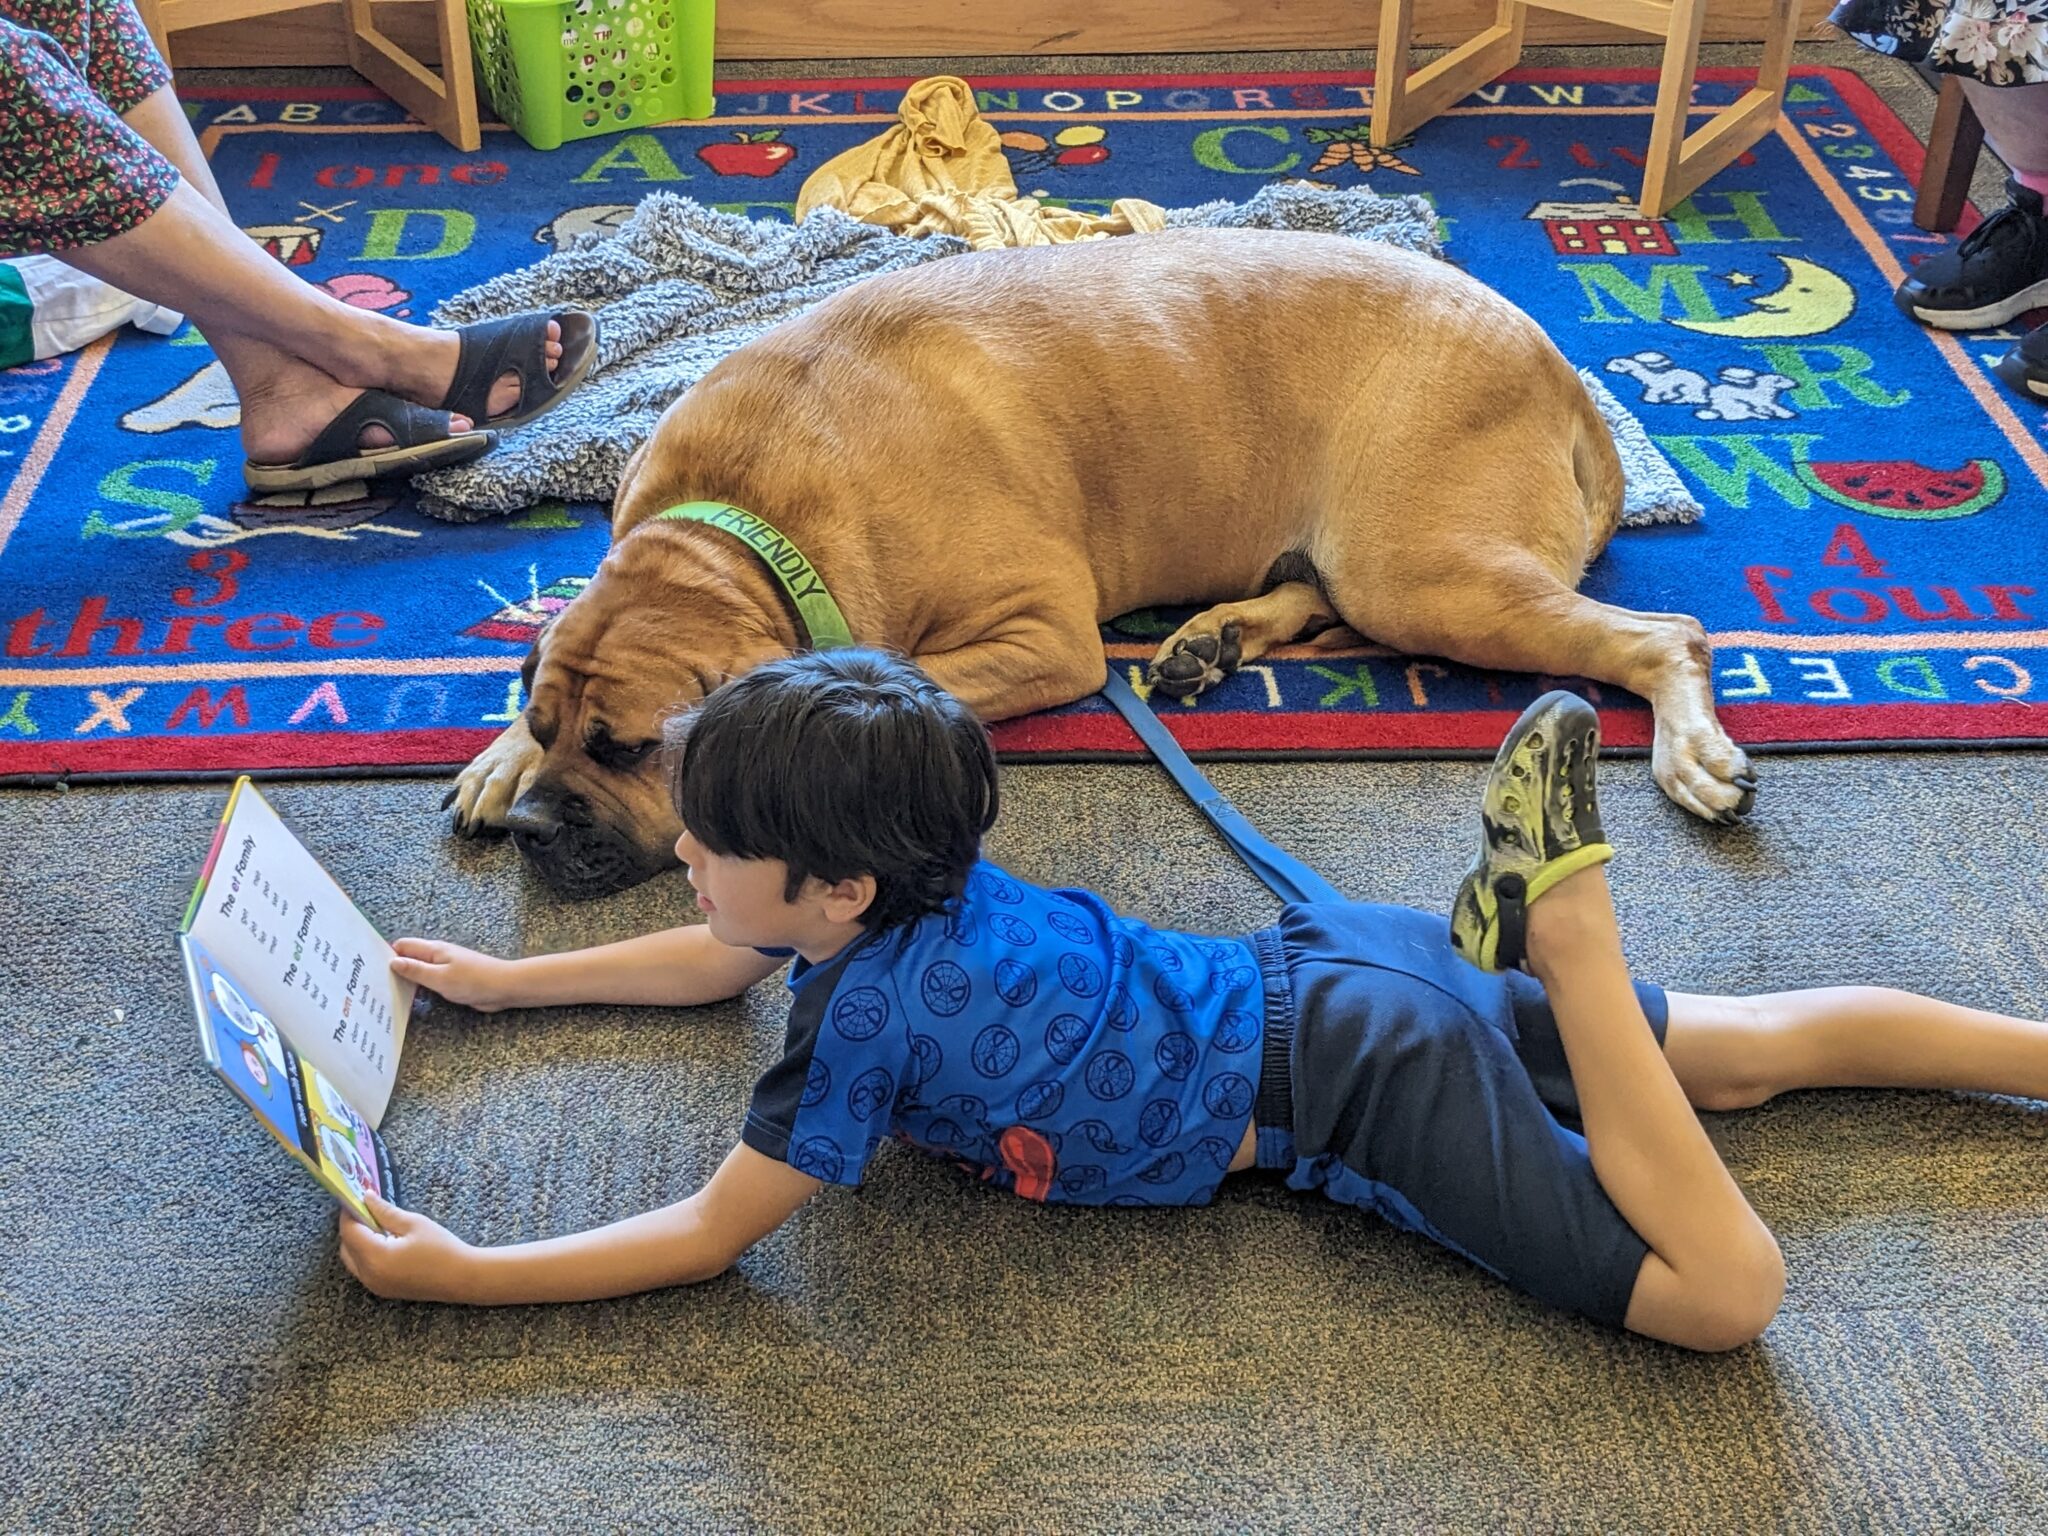 Dog and boy reading a book on the floor.